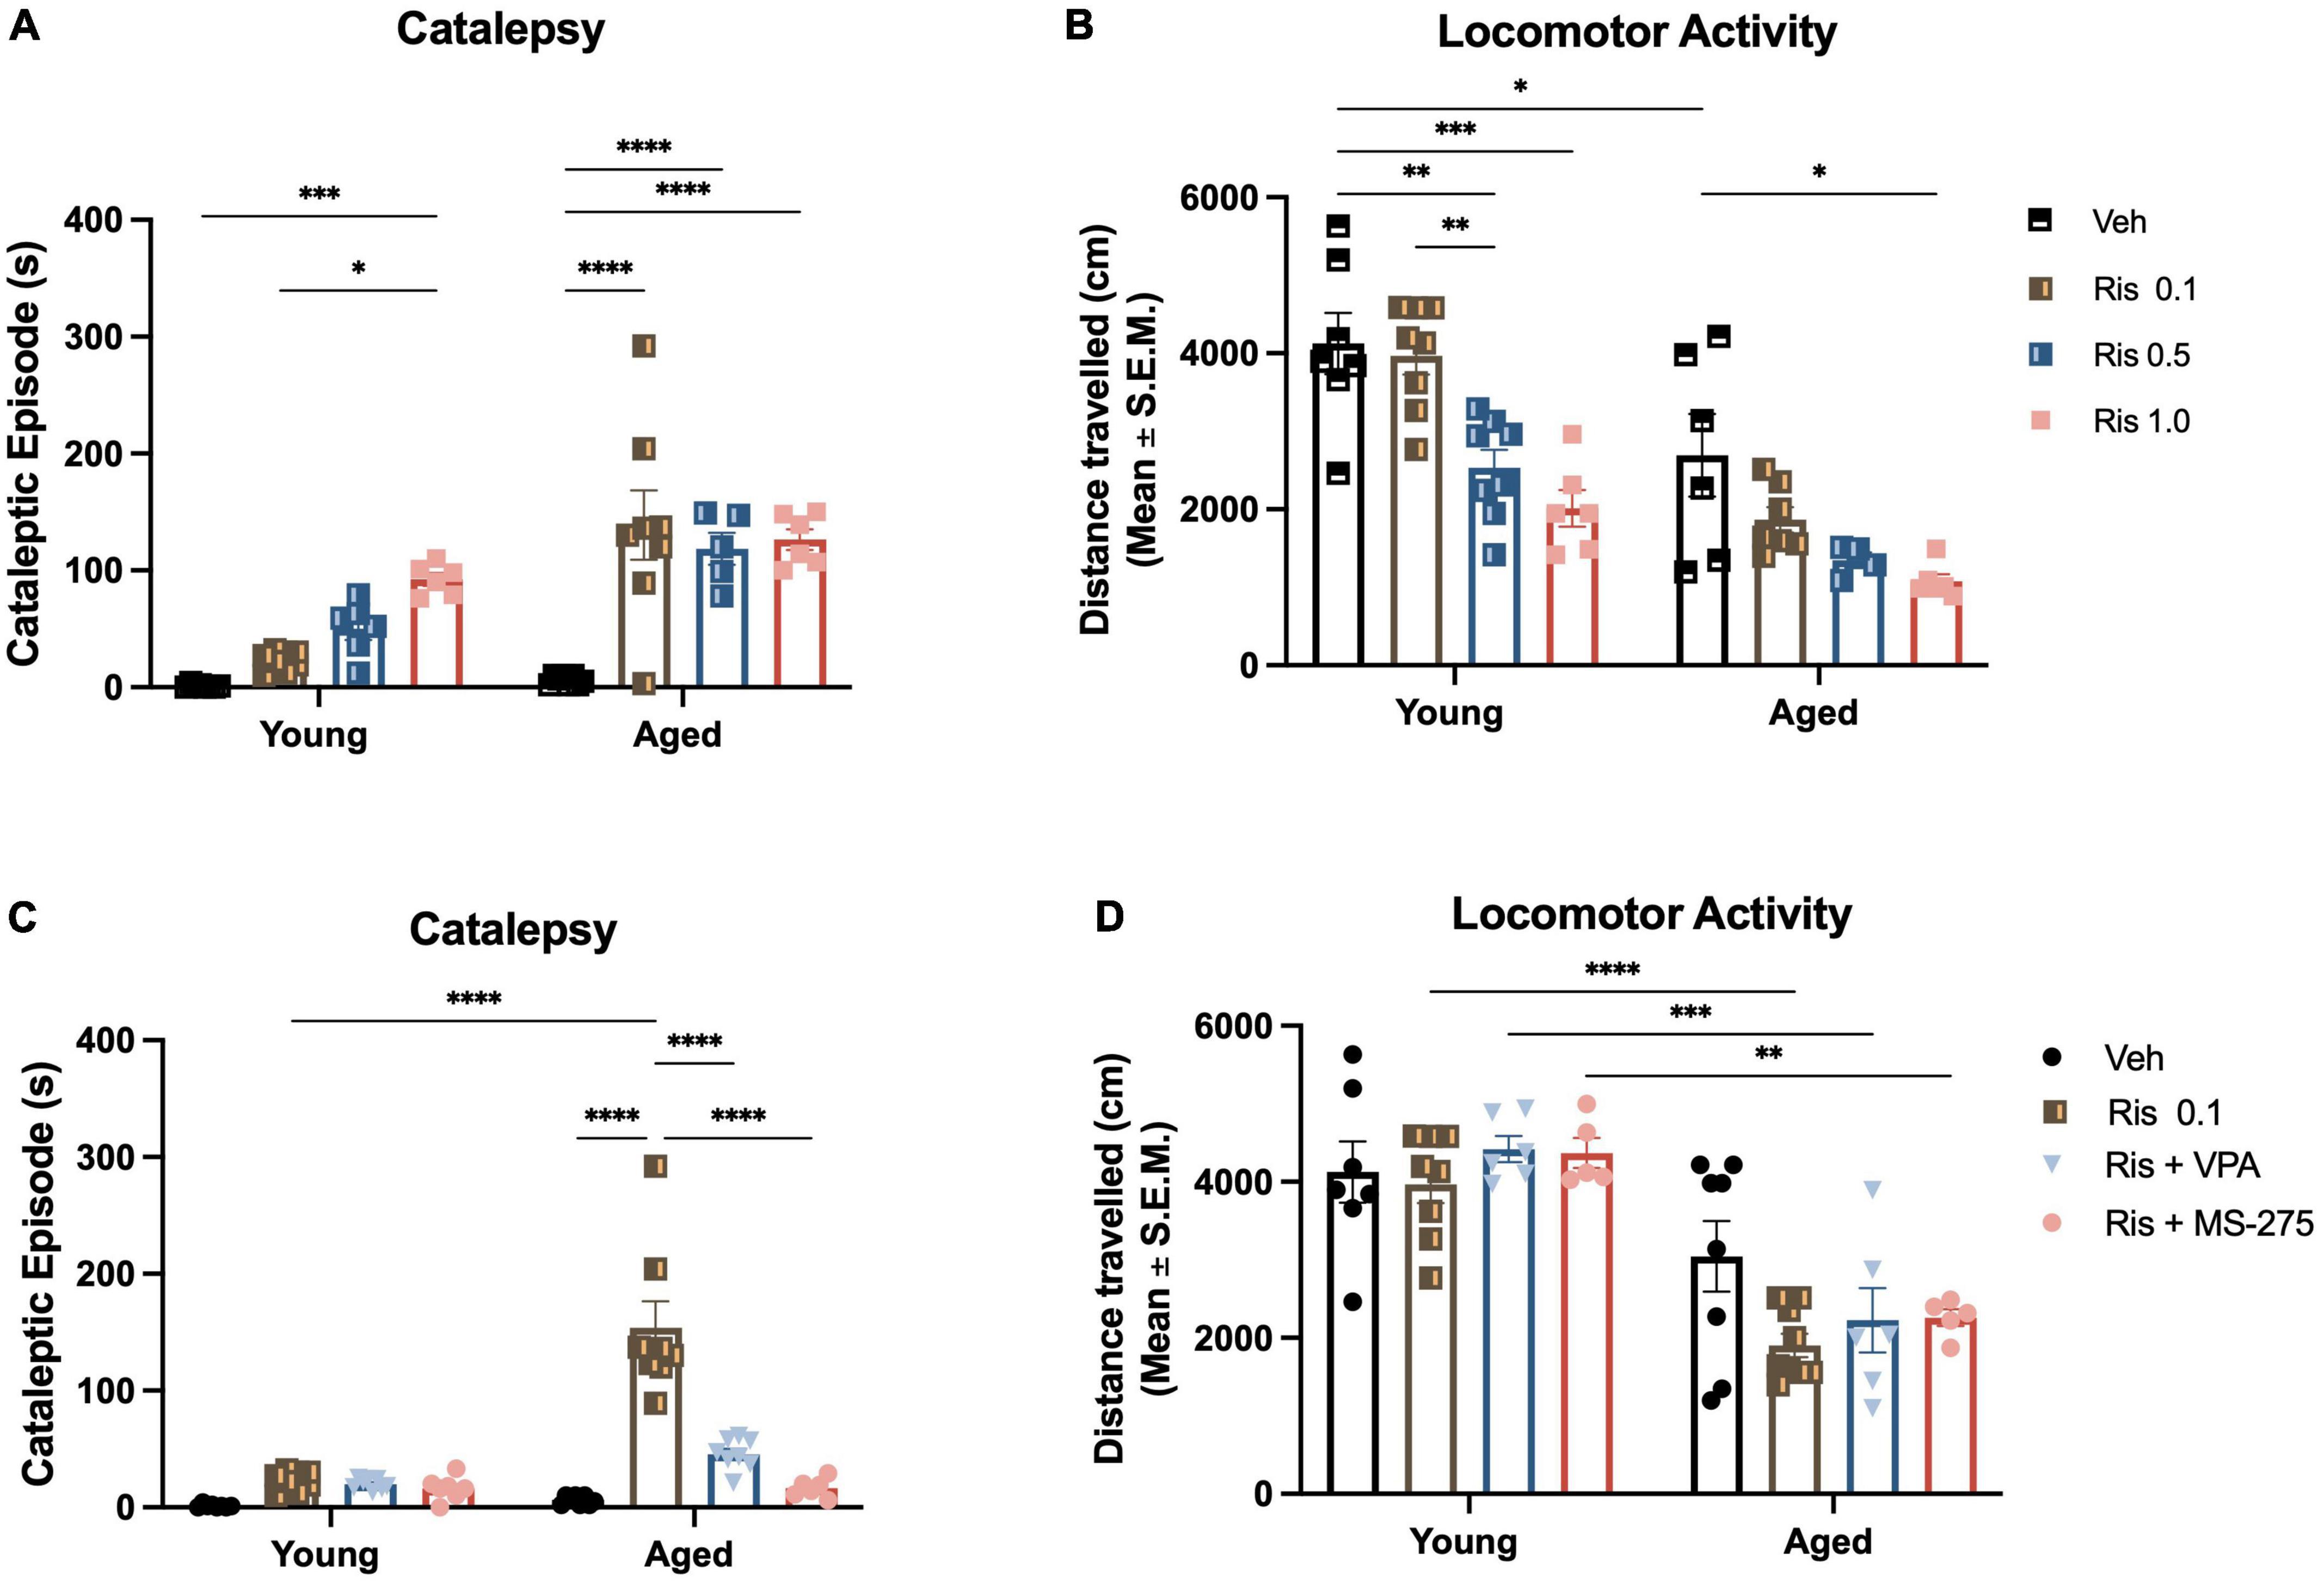 Histone deacetylase inhibitors mitigate antipsychotic risperidone-induced motor side effects in aged mice and in a mouse model of Alzheimer’s disease